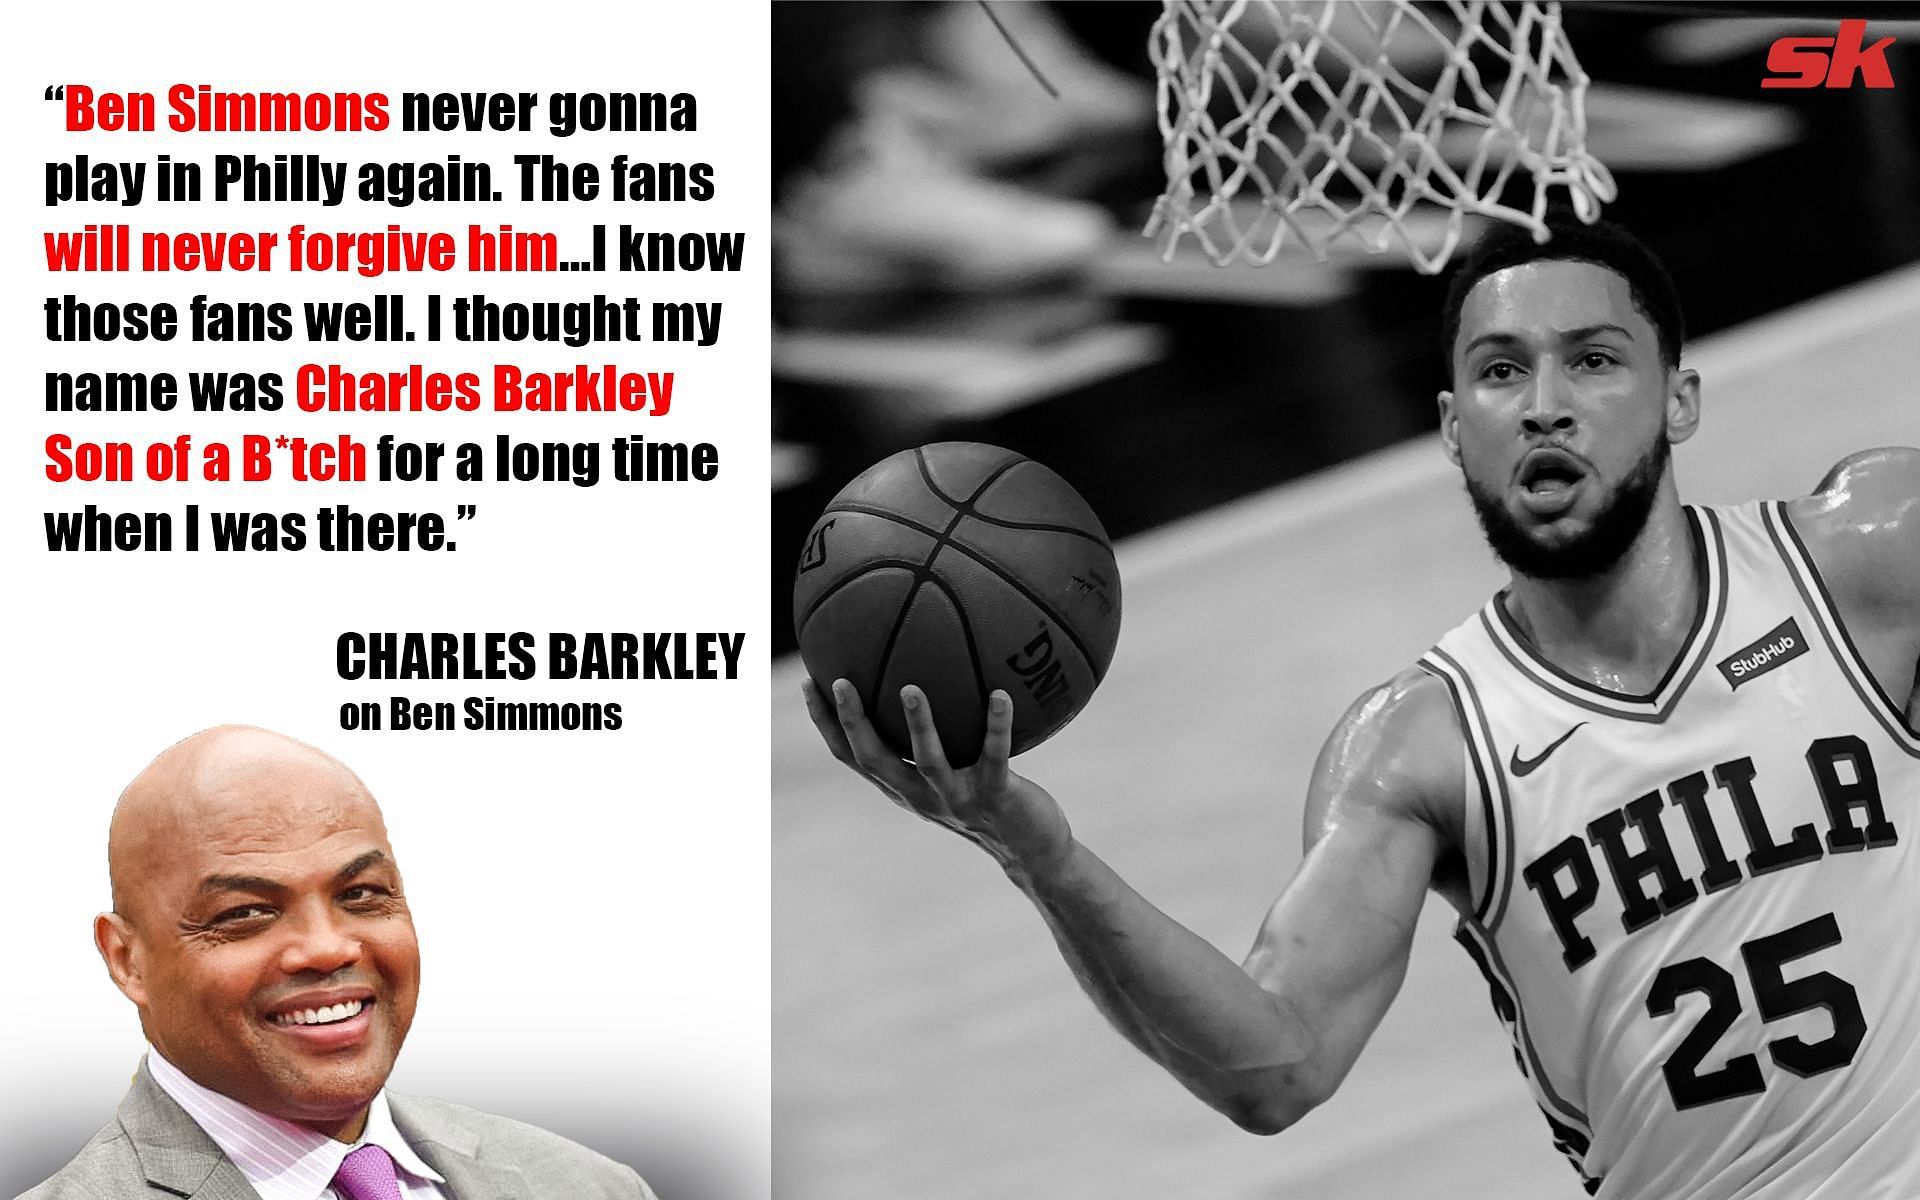 Charles Barkley gives his take on the Ben Simmons situation in Philadelphia.